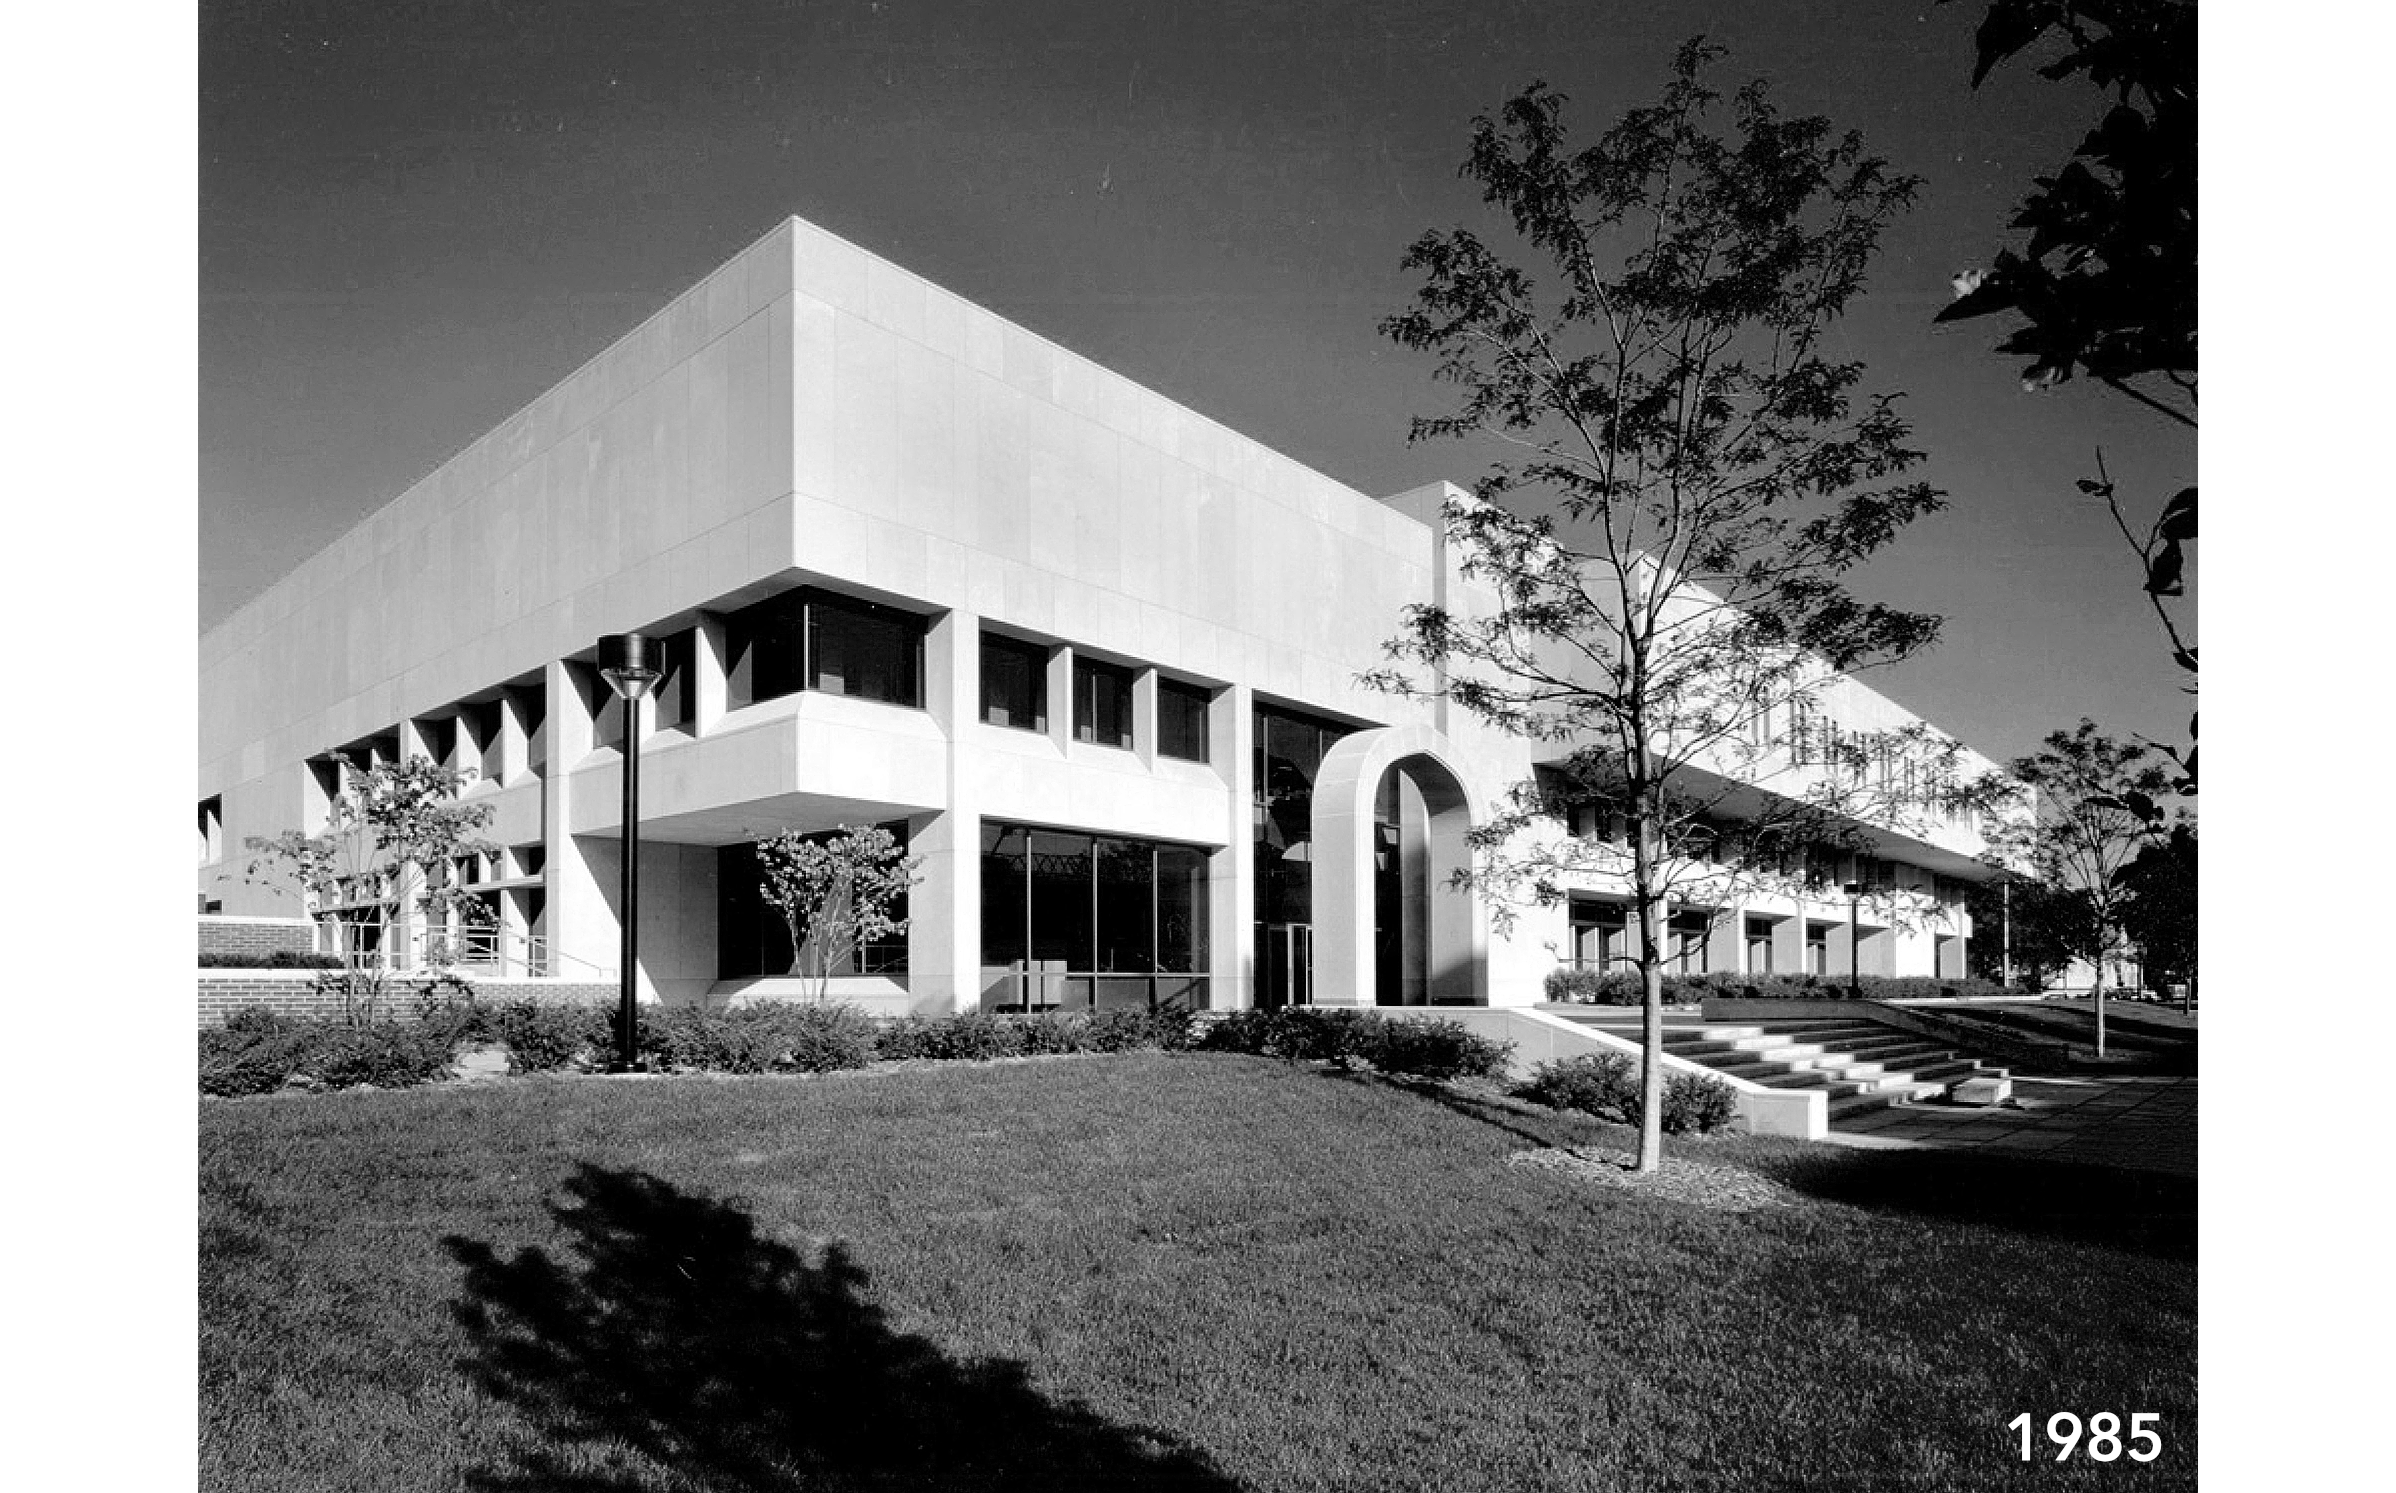 1985 photograph of Crerar Library shortly after it was completed